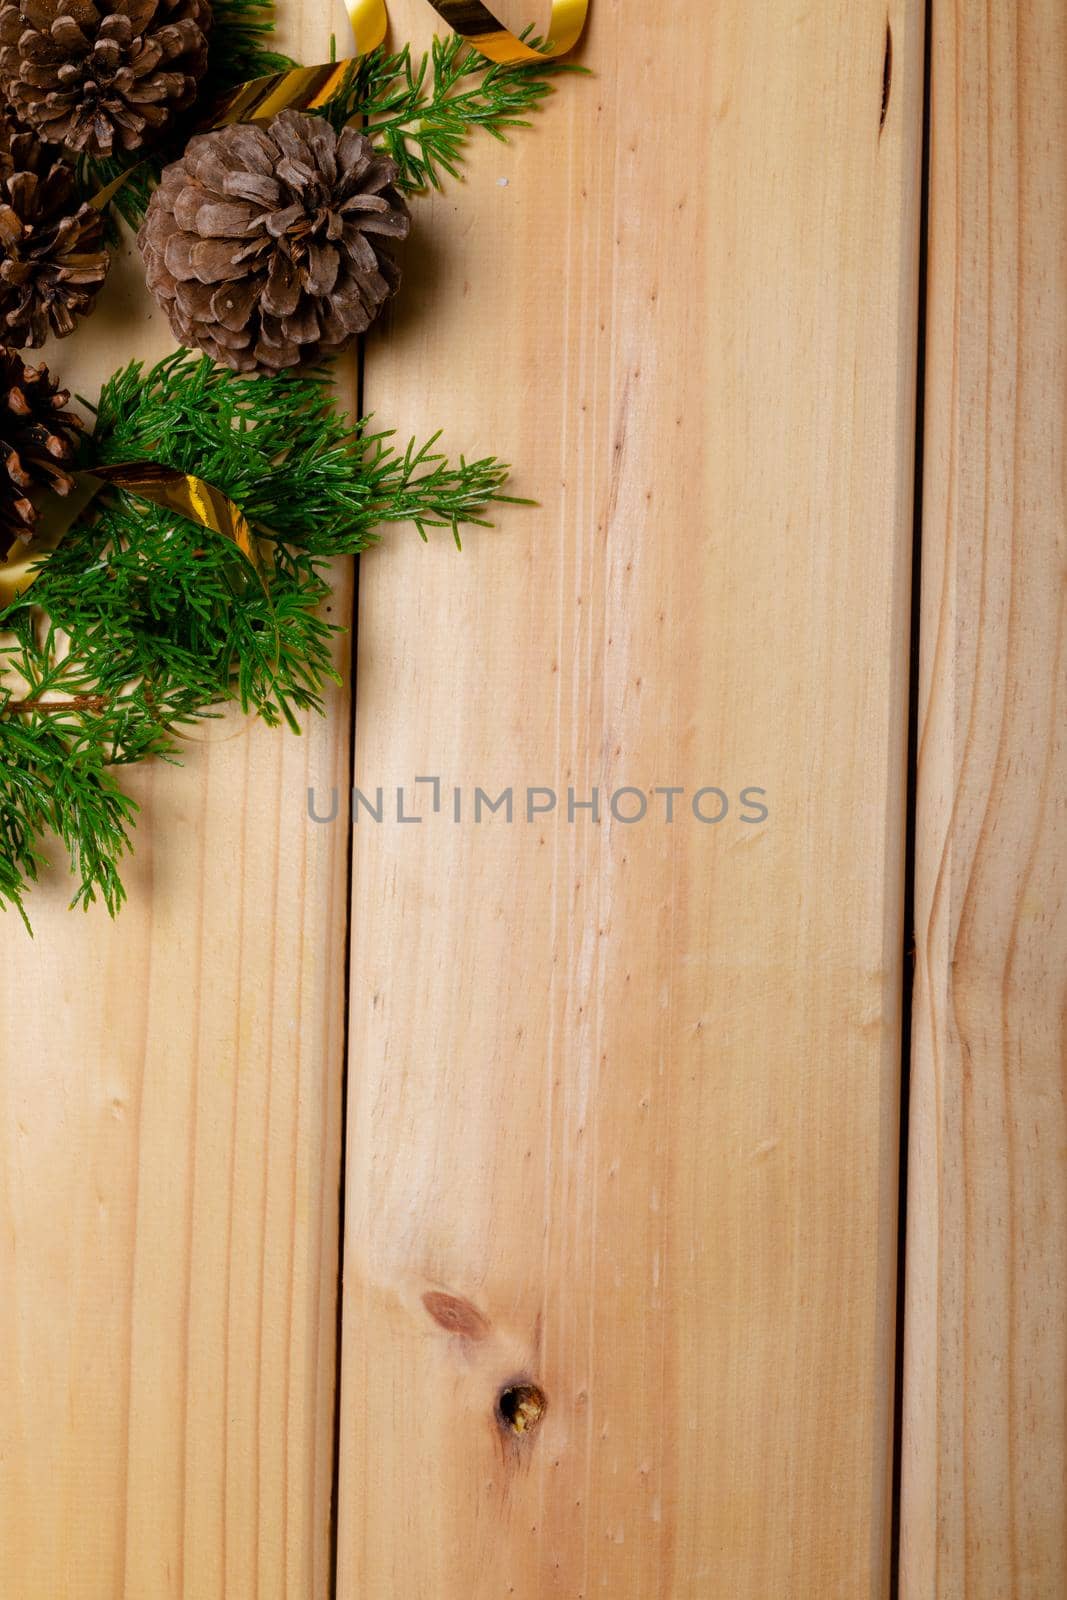 Composition of christmas decorations with pine cones and copy space on wooden background. christmas, tradition and celebration concept.